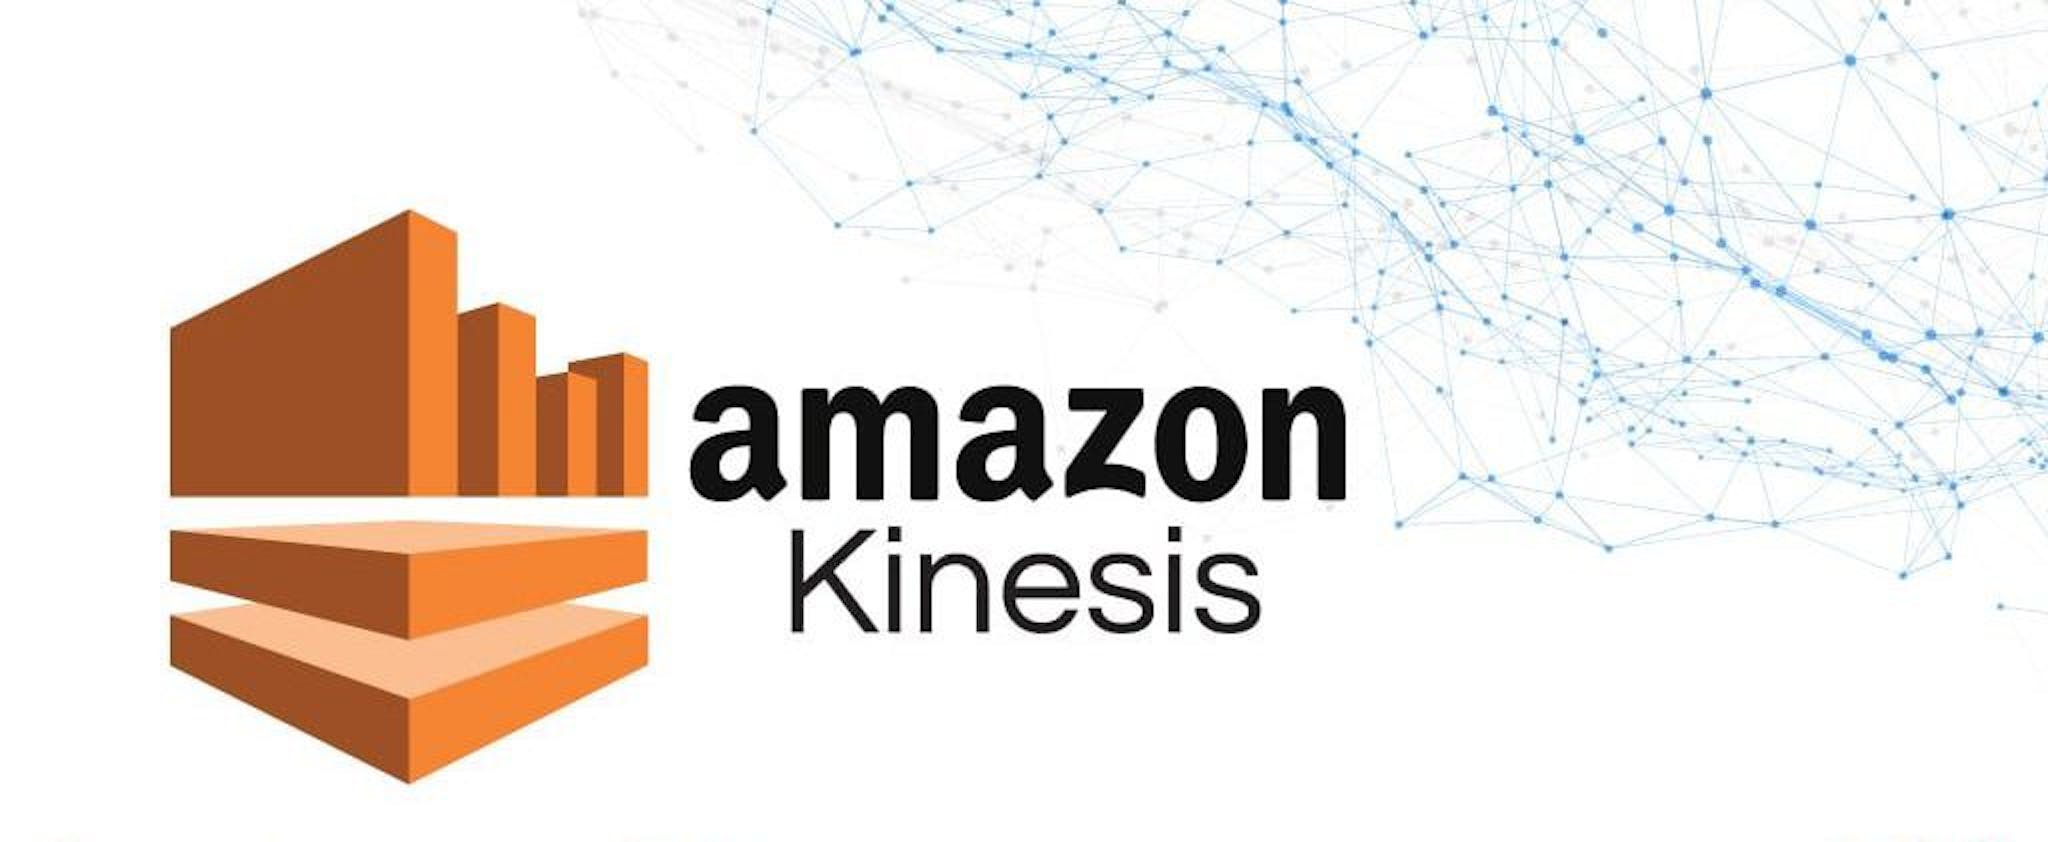 featured image - Amazon Kinesis: The AWS Data Streaming Solution